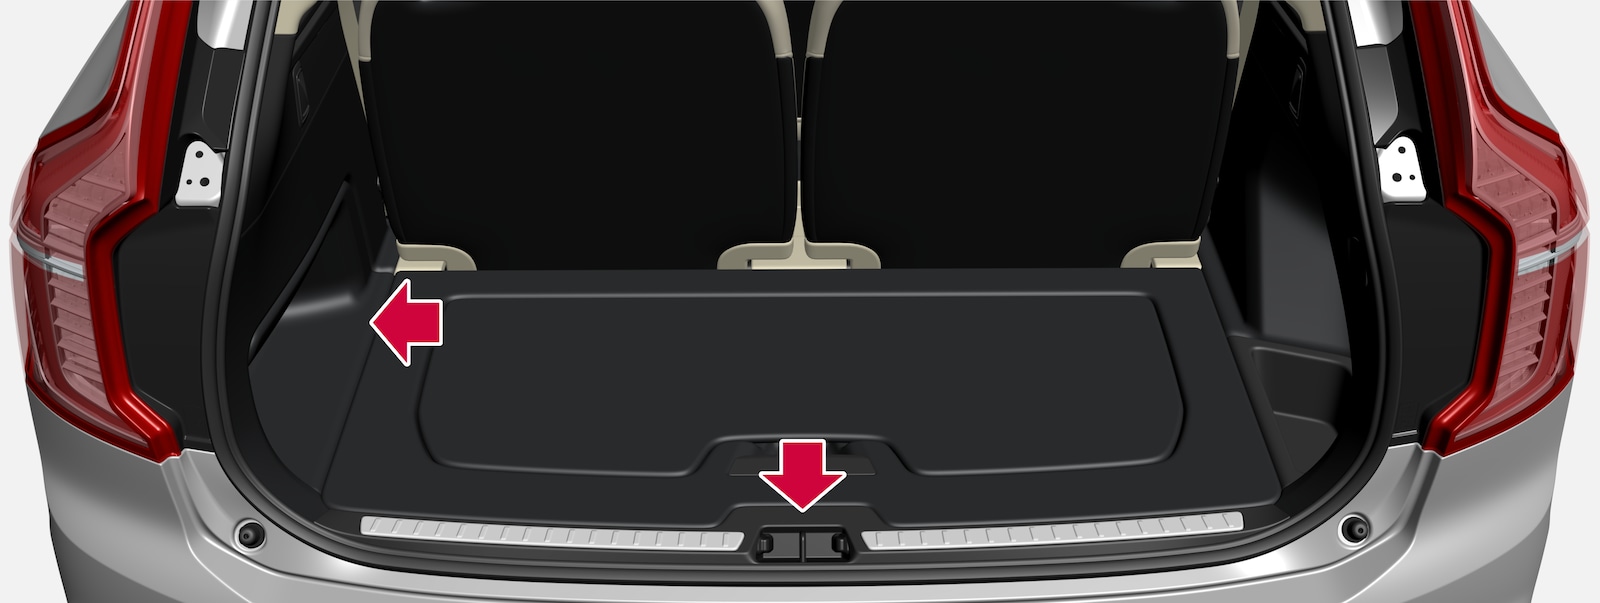 iCup-2246-XC90*-iCup-Luggage storage overview